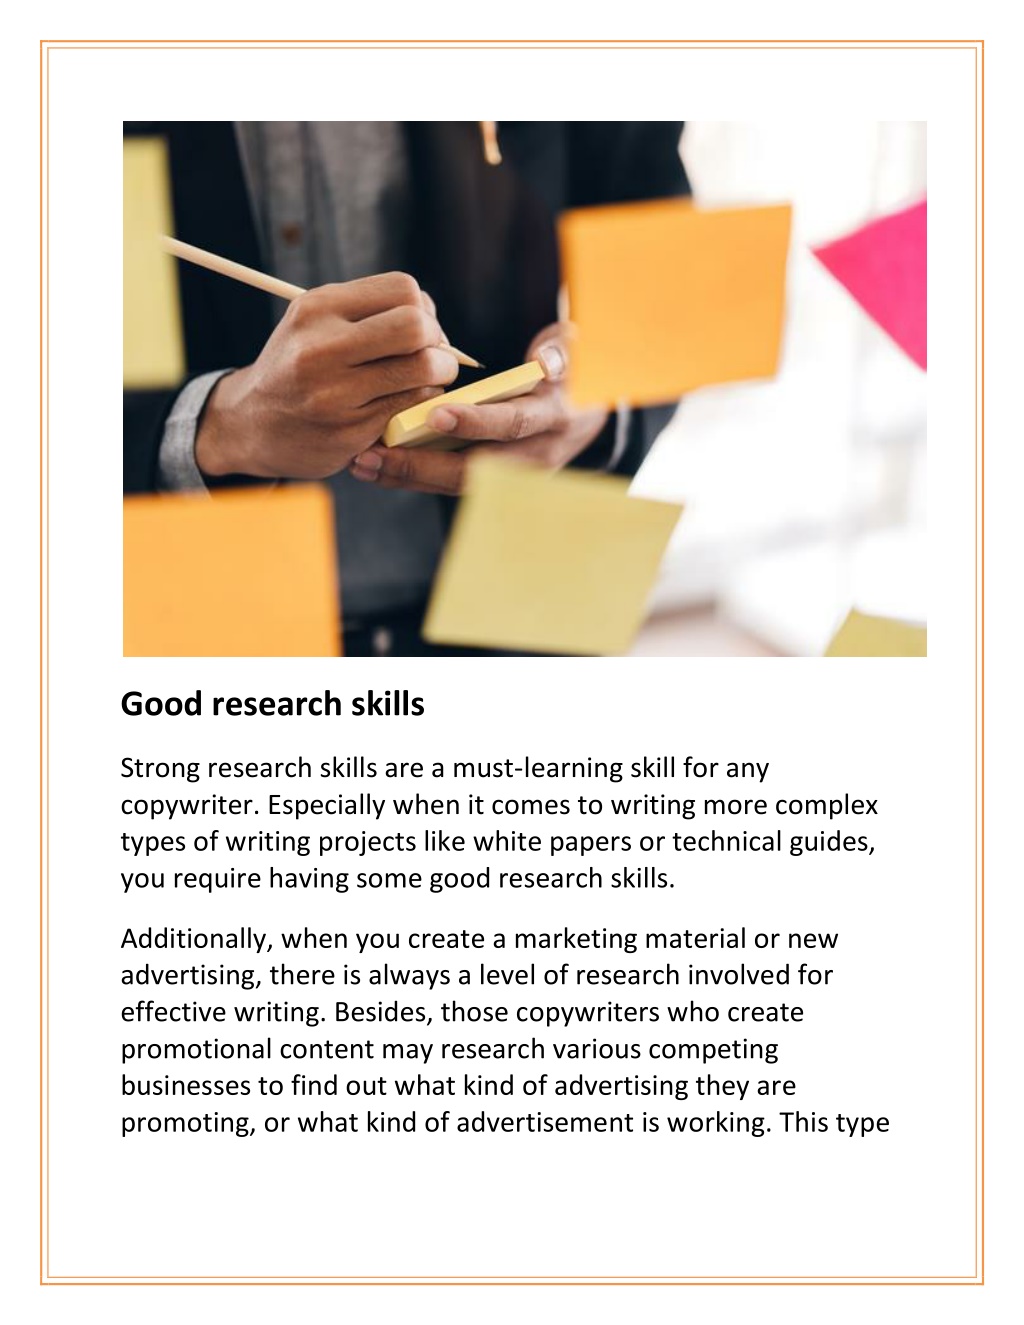 research skills for copywriter